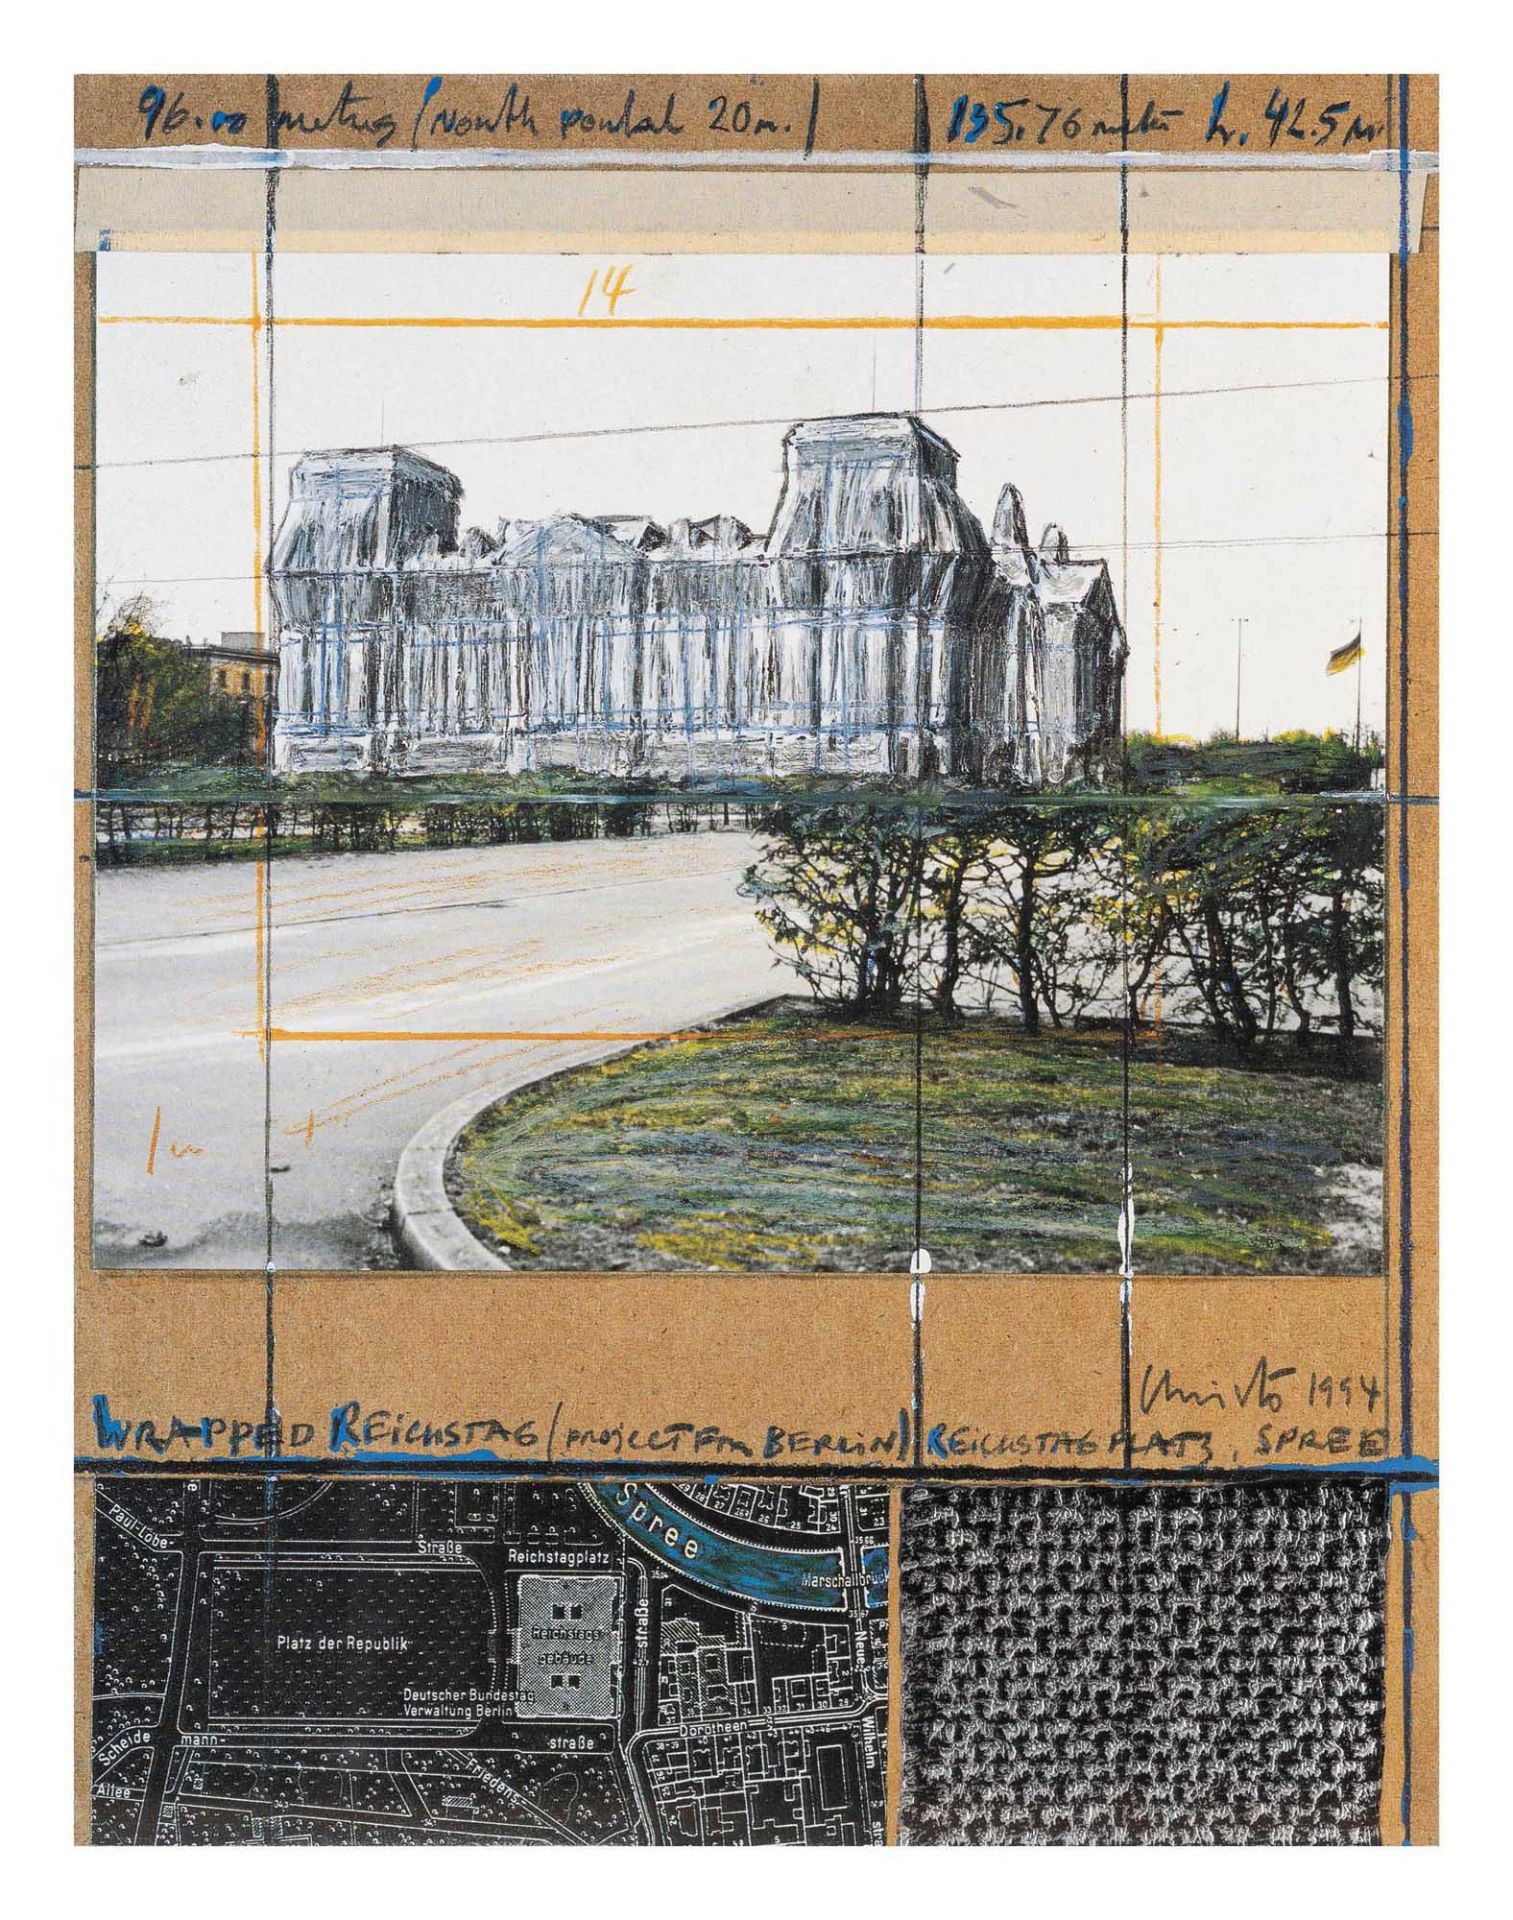 Javacheff Christo (1935 Gabrowo)Wrapped Reichstag, Project for Berlin, Farboffsetlithografie auf